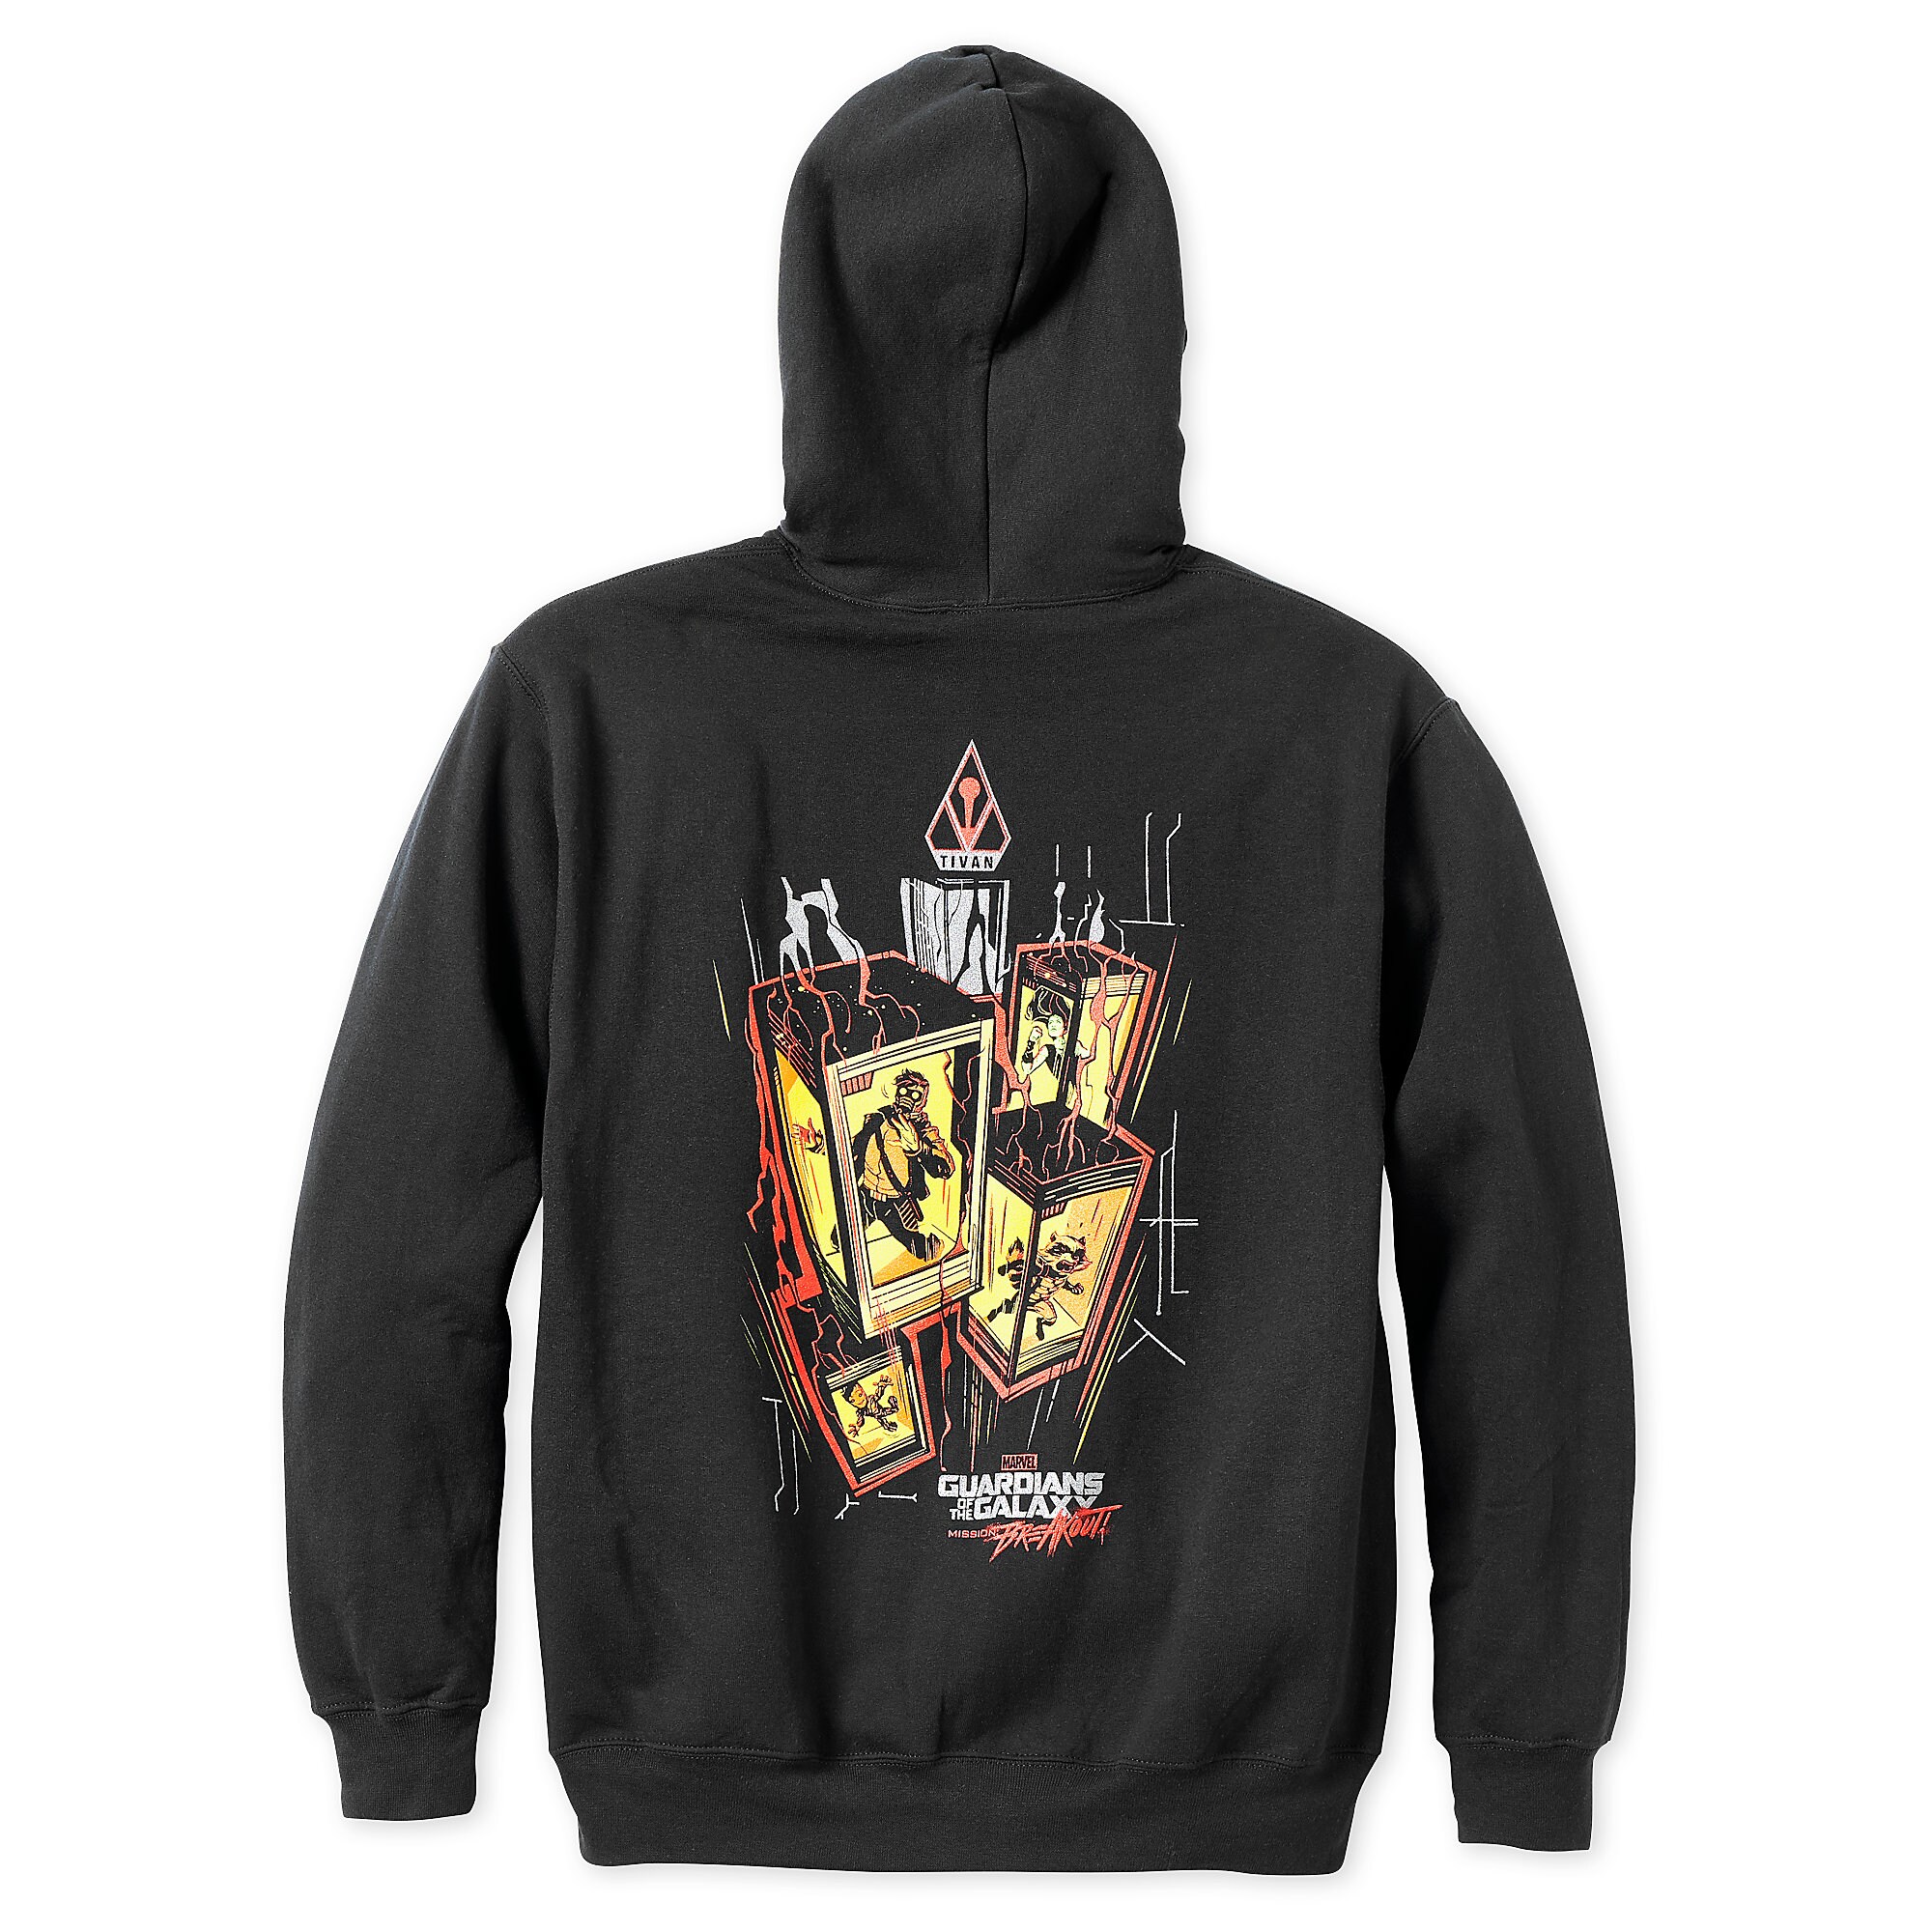 Guardians of the Galaxy Zip Hoodie for Men - Mission: Breakout! - Buy ...